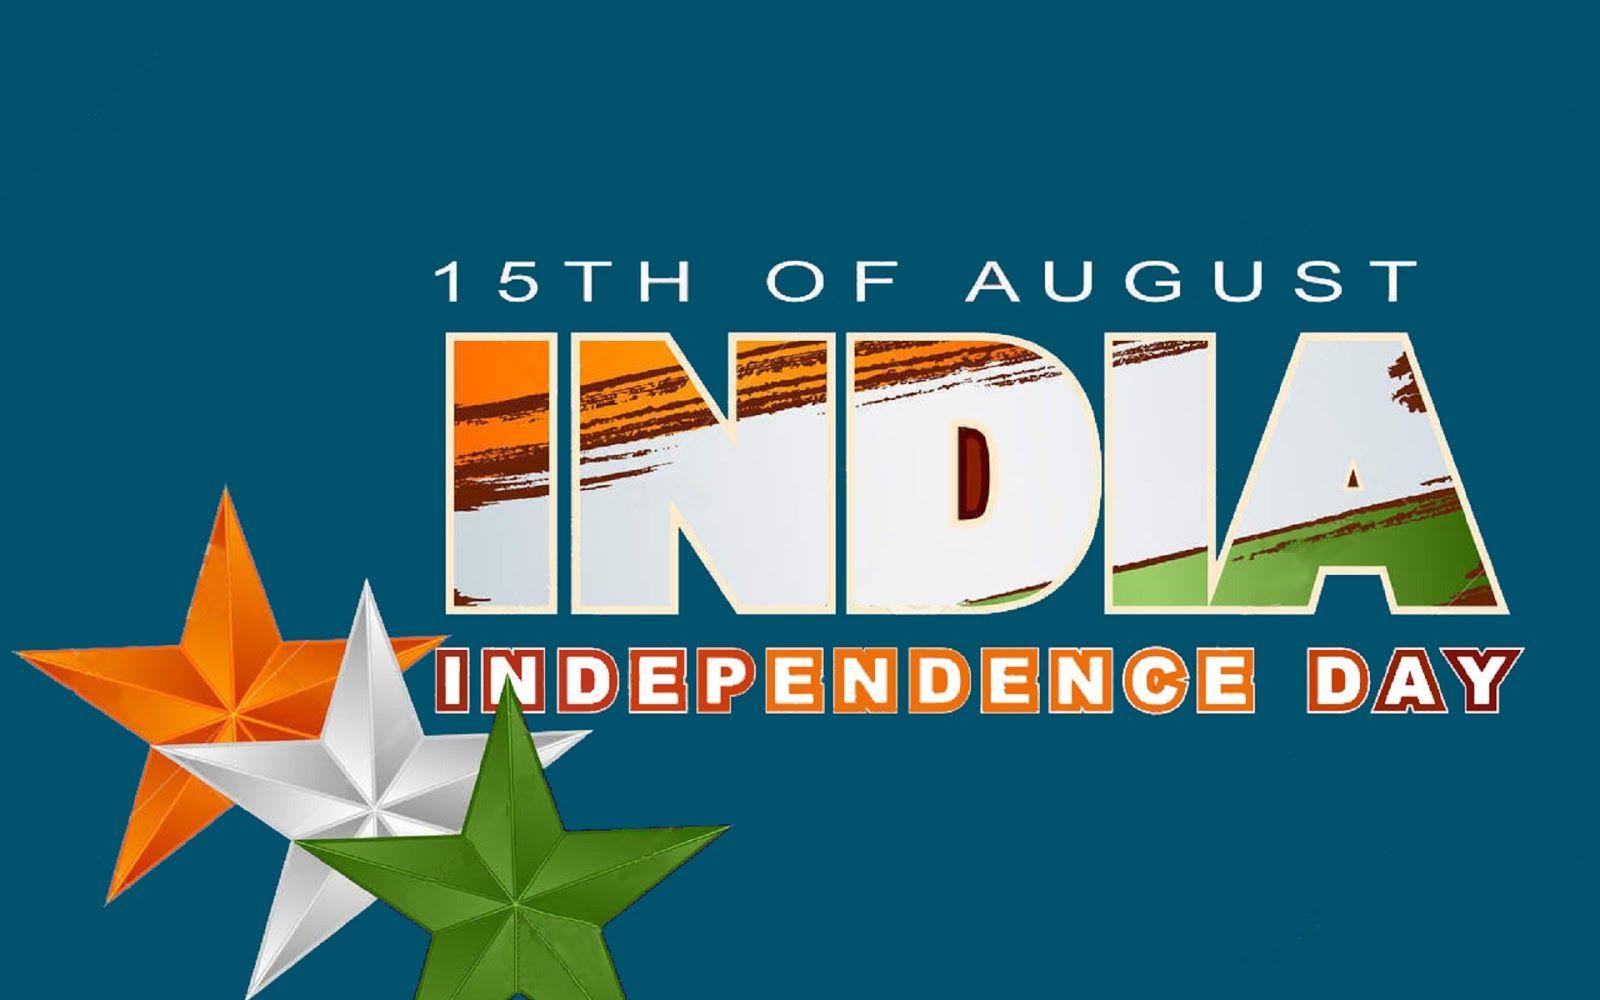 Independence Day Image 2018: Happy Independence Day Image